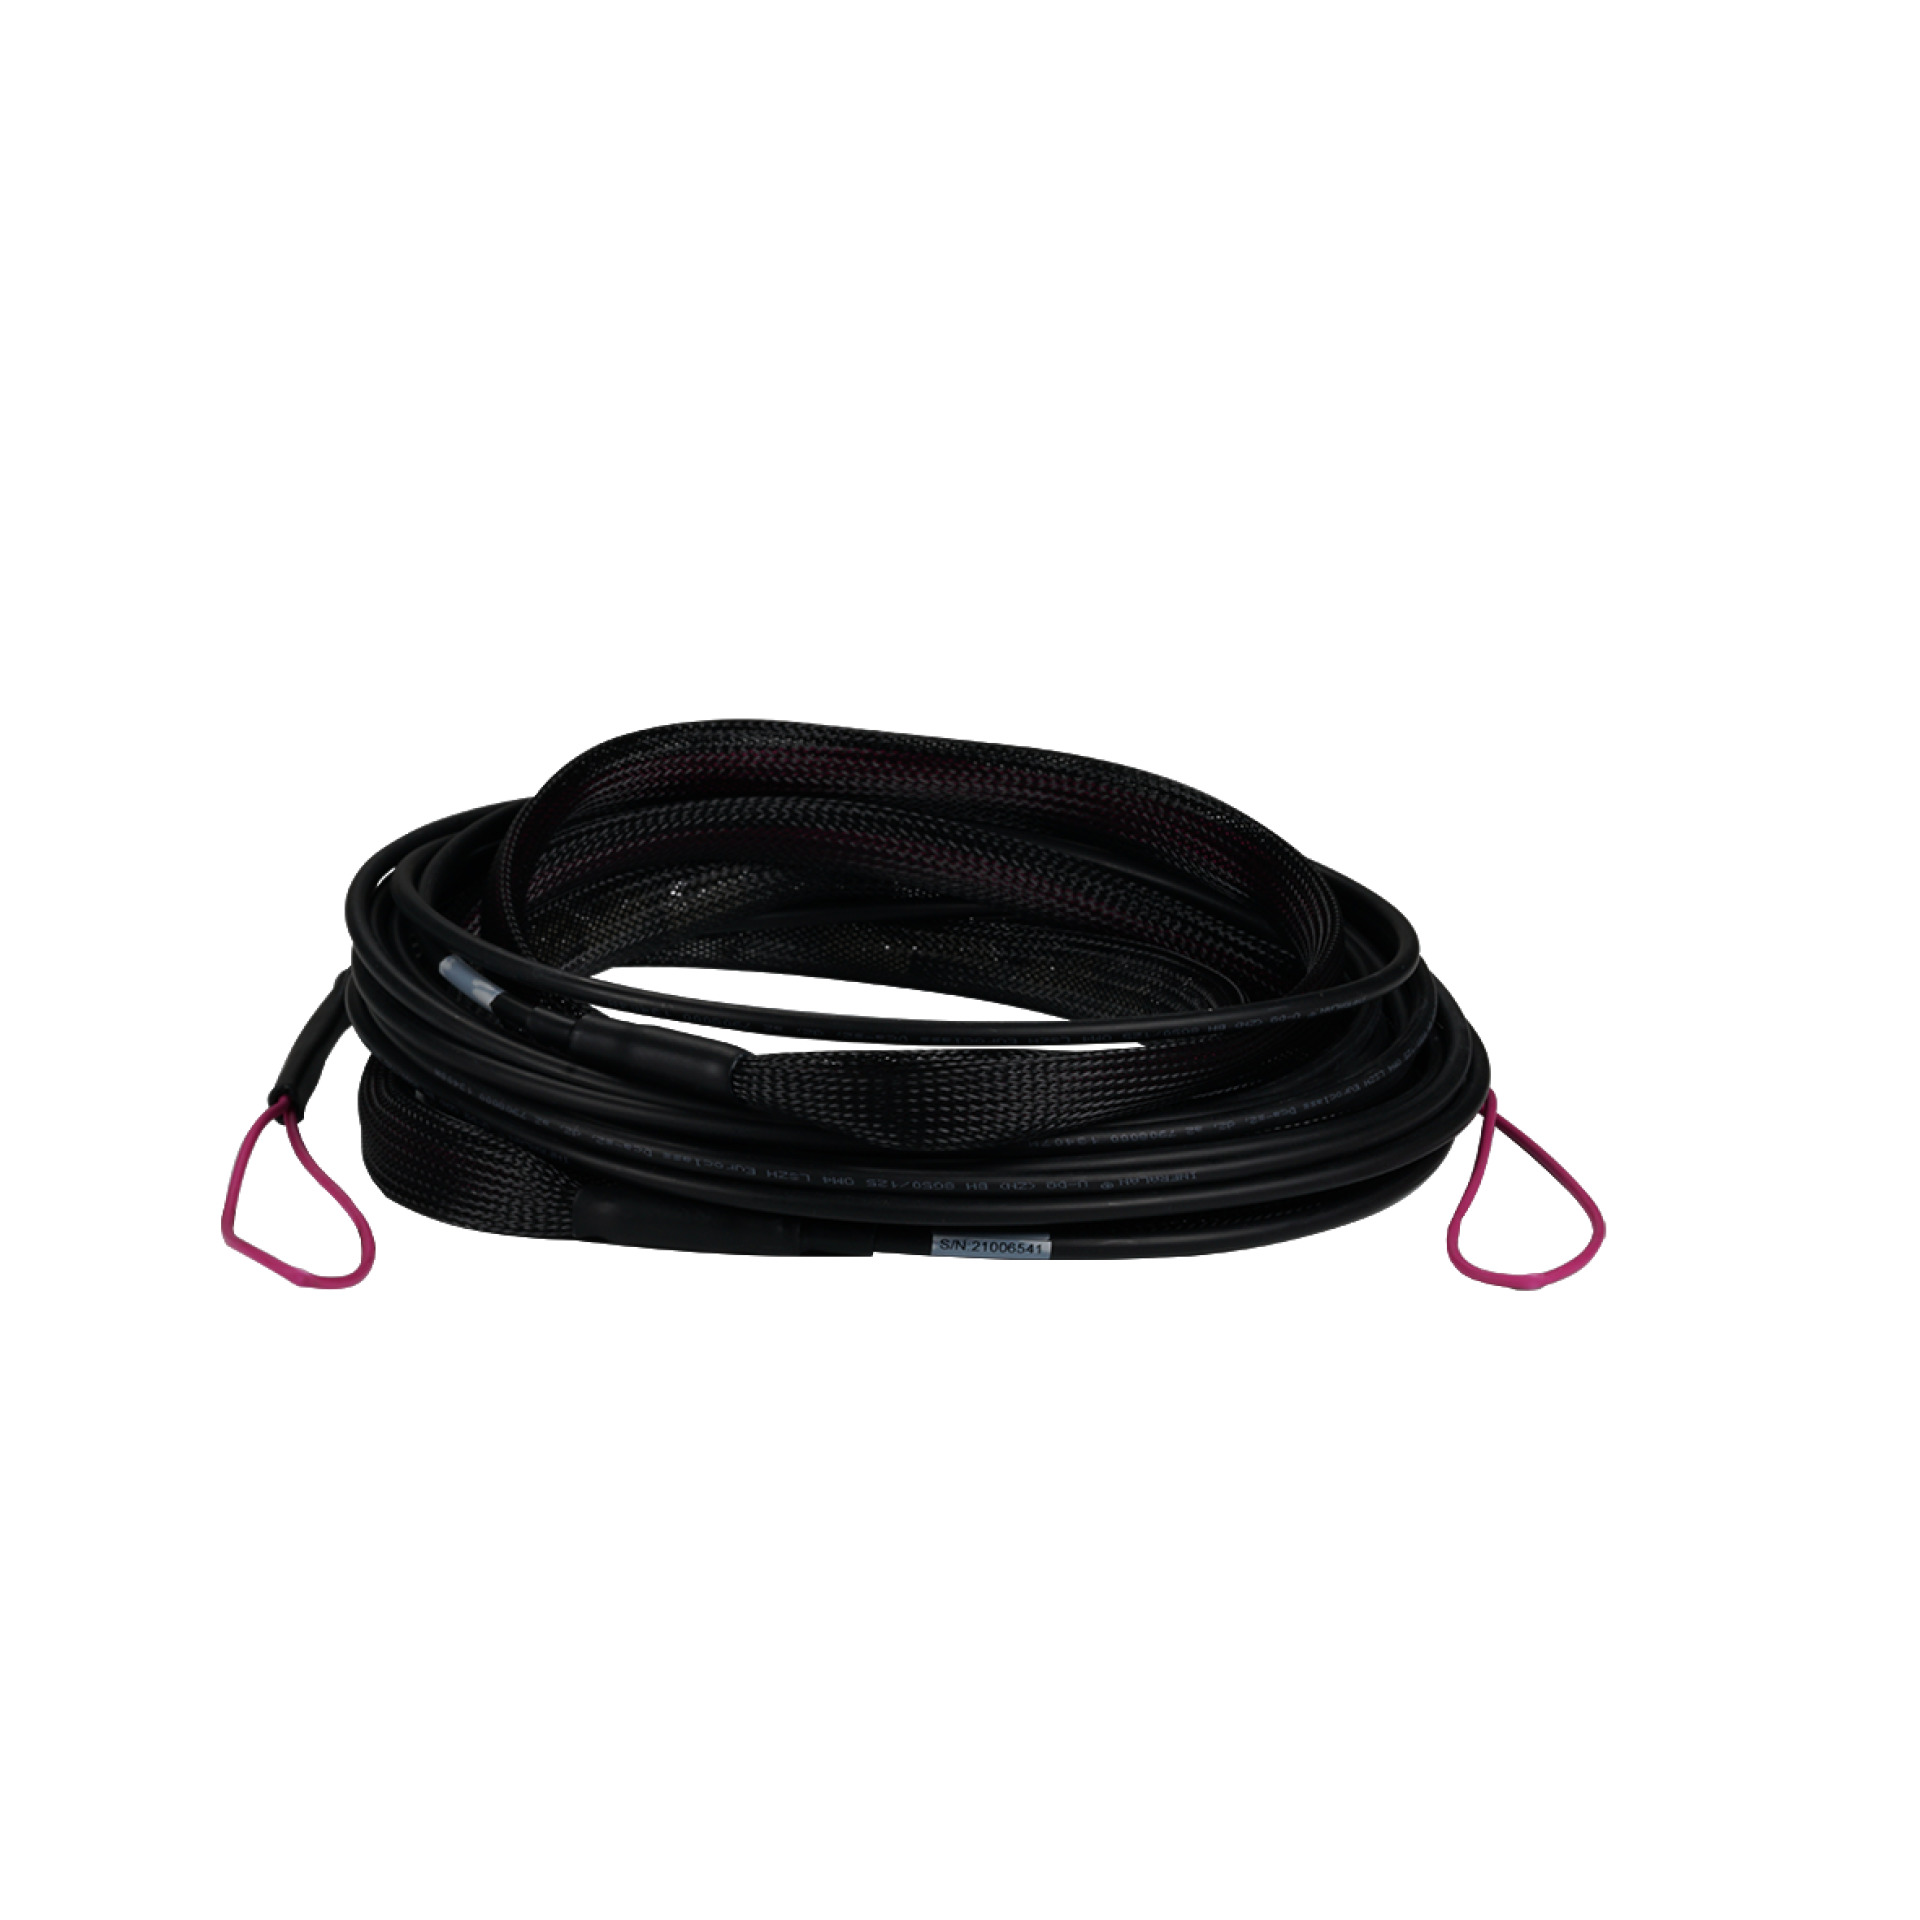 Trunk cable U-DQ(ZN)BH 4G 50/125, SC/SC OM4 190m